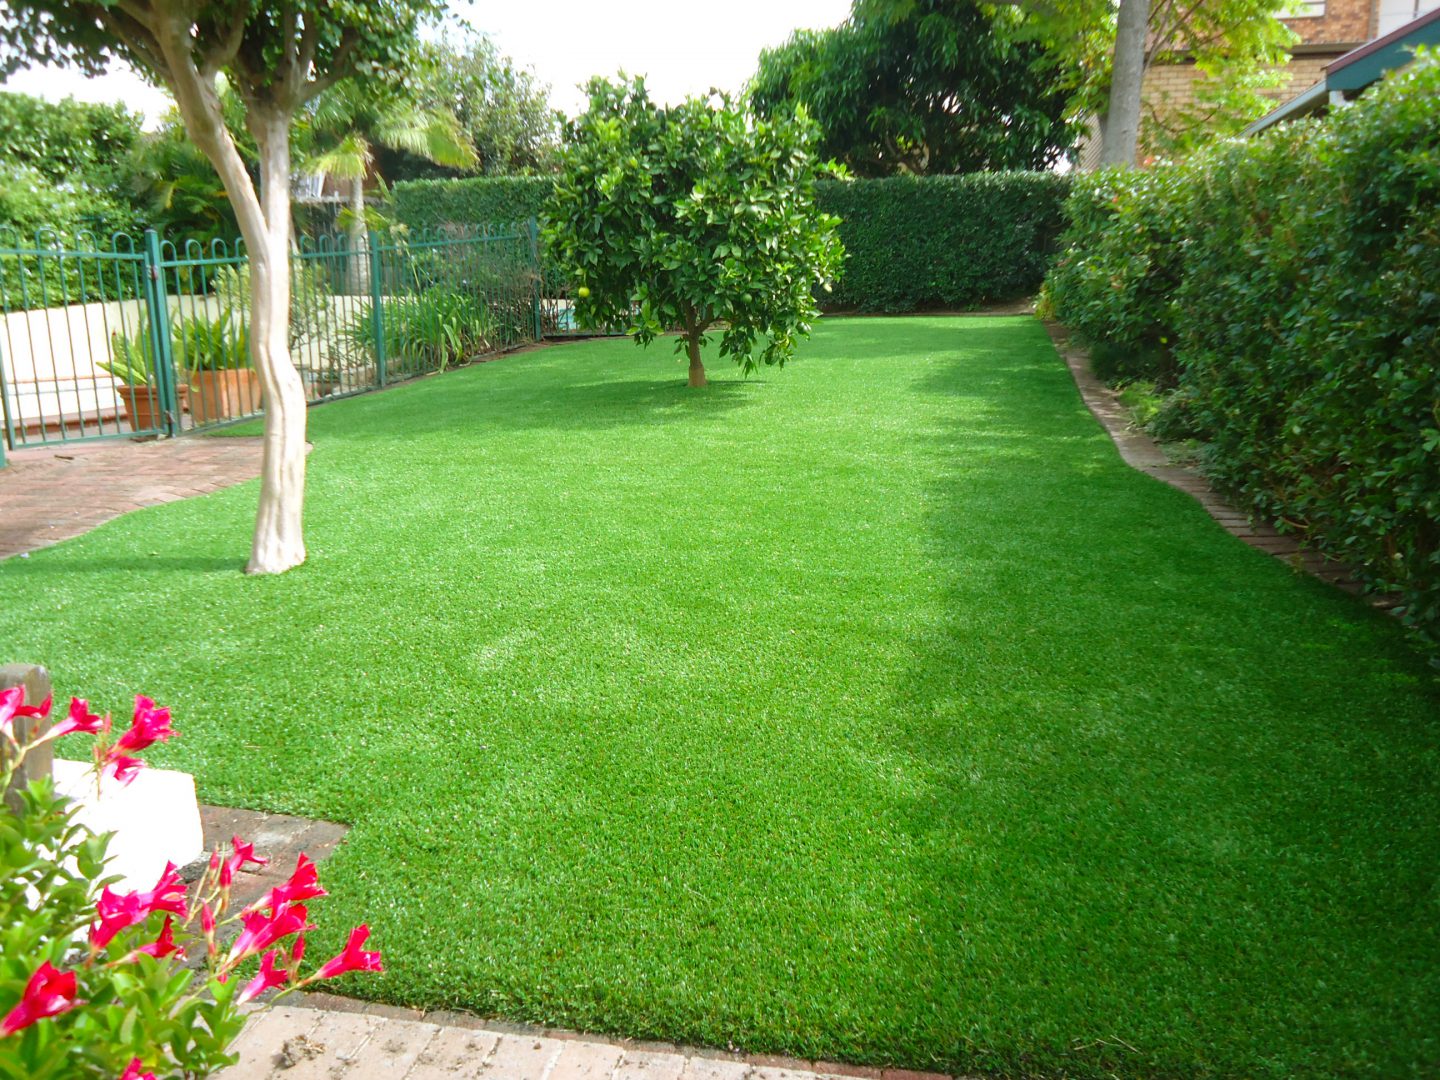 Artificial Grass Lawns - A good choice for your home?